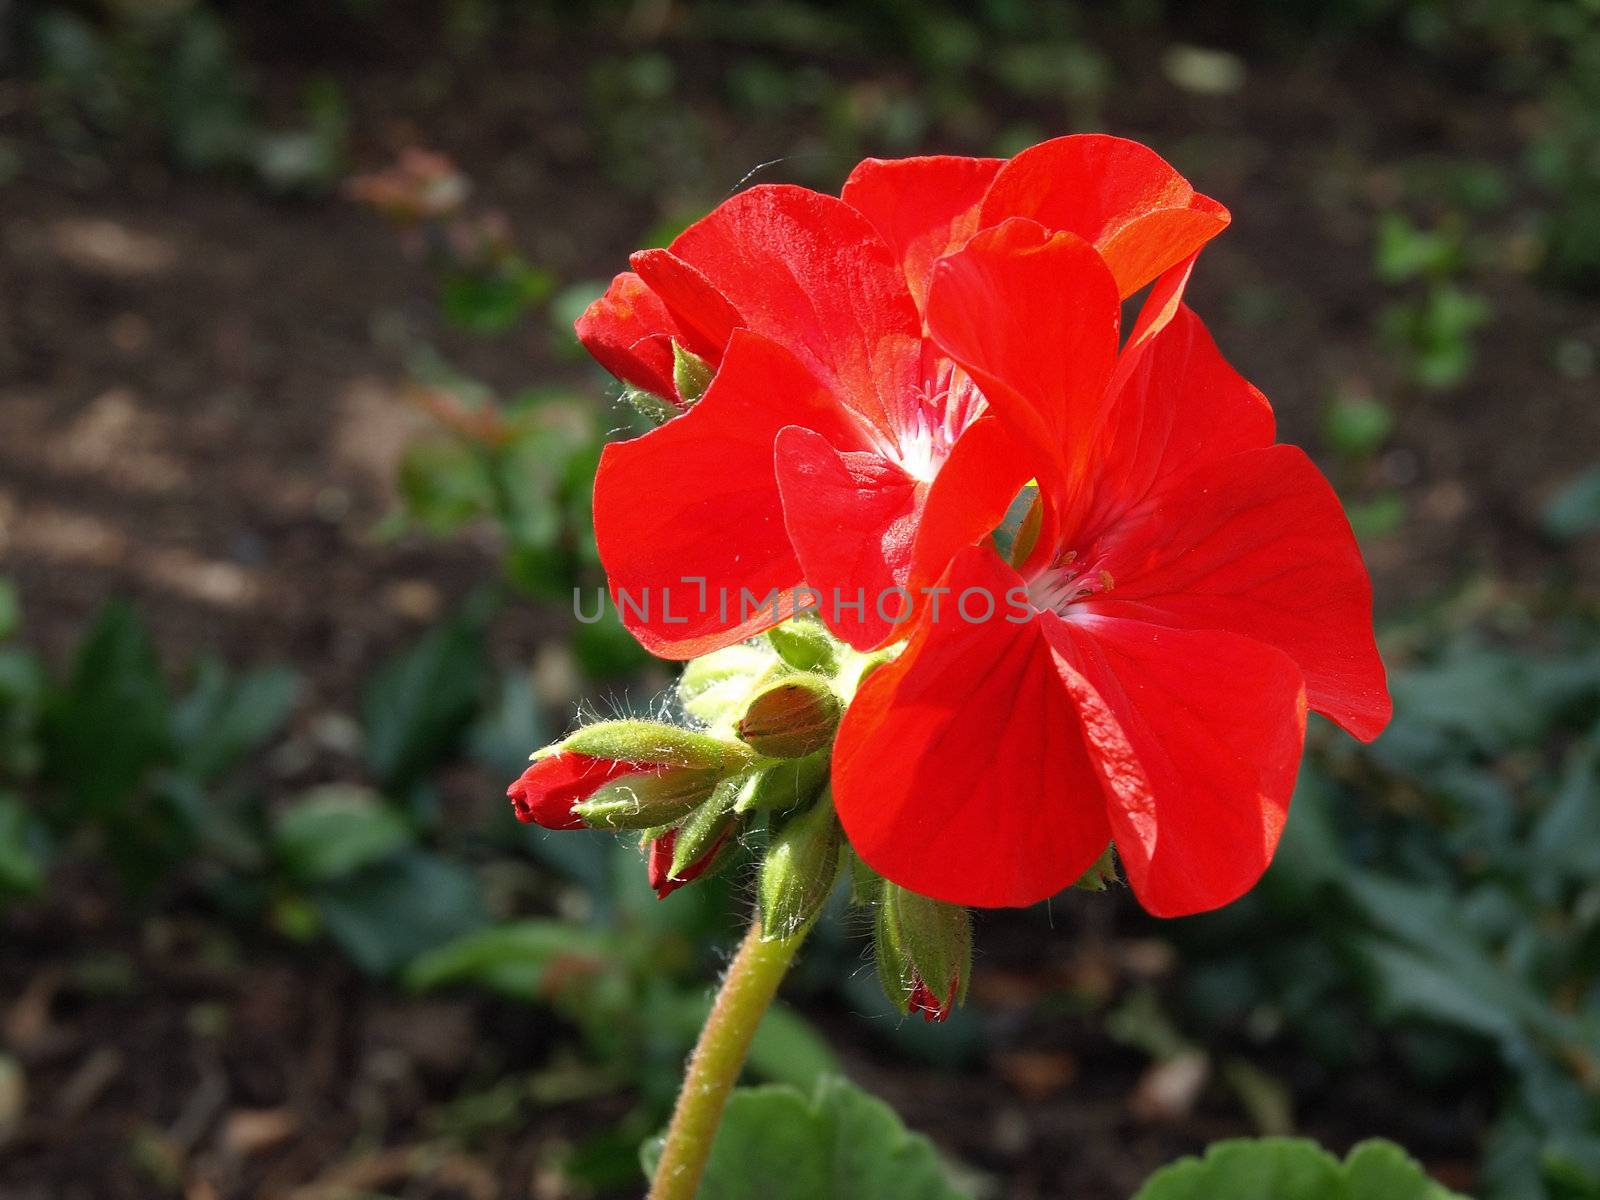 A bright red Petunia growing in a garden.